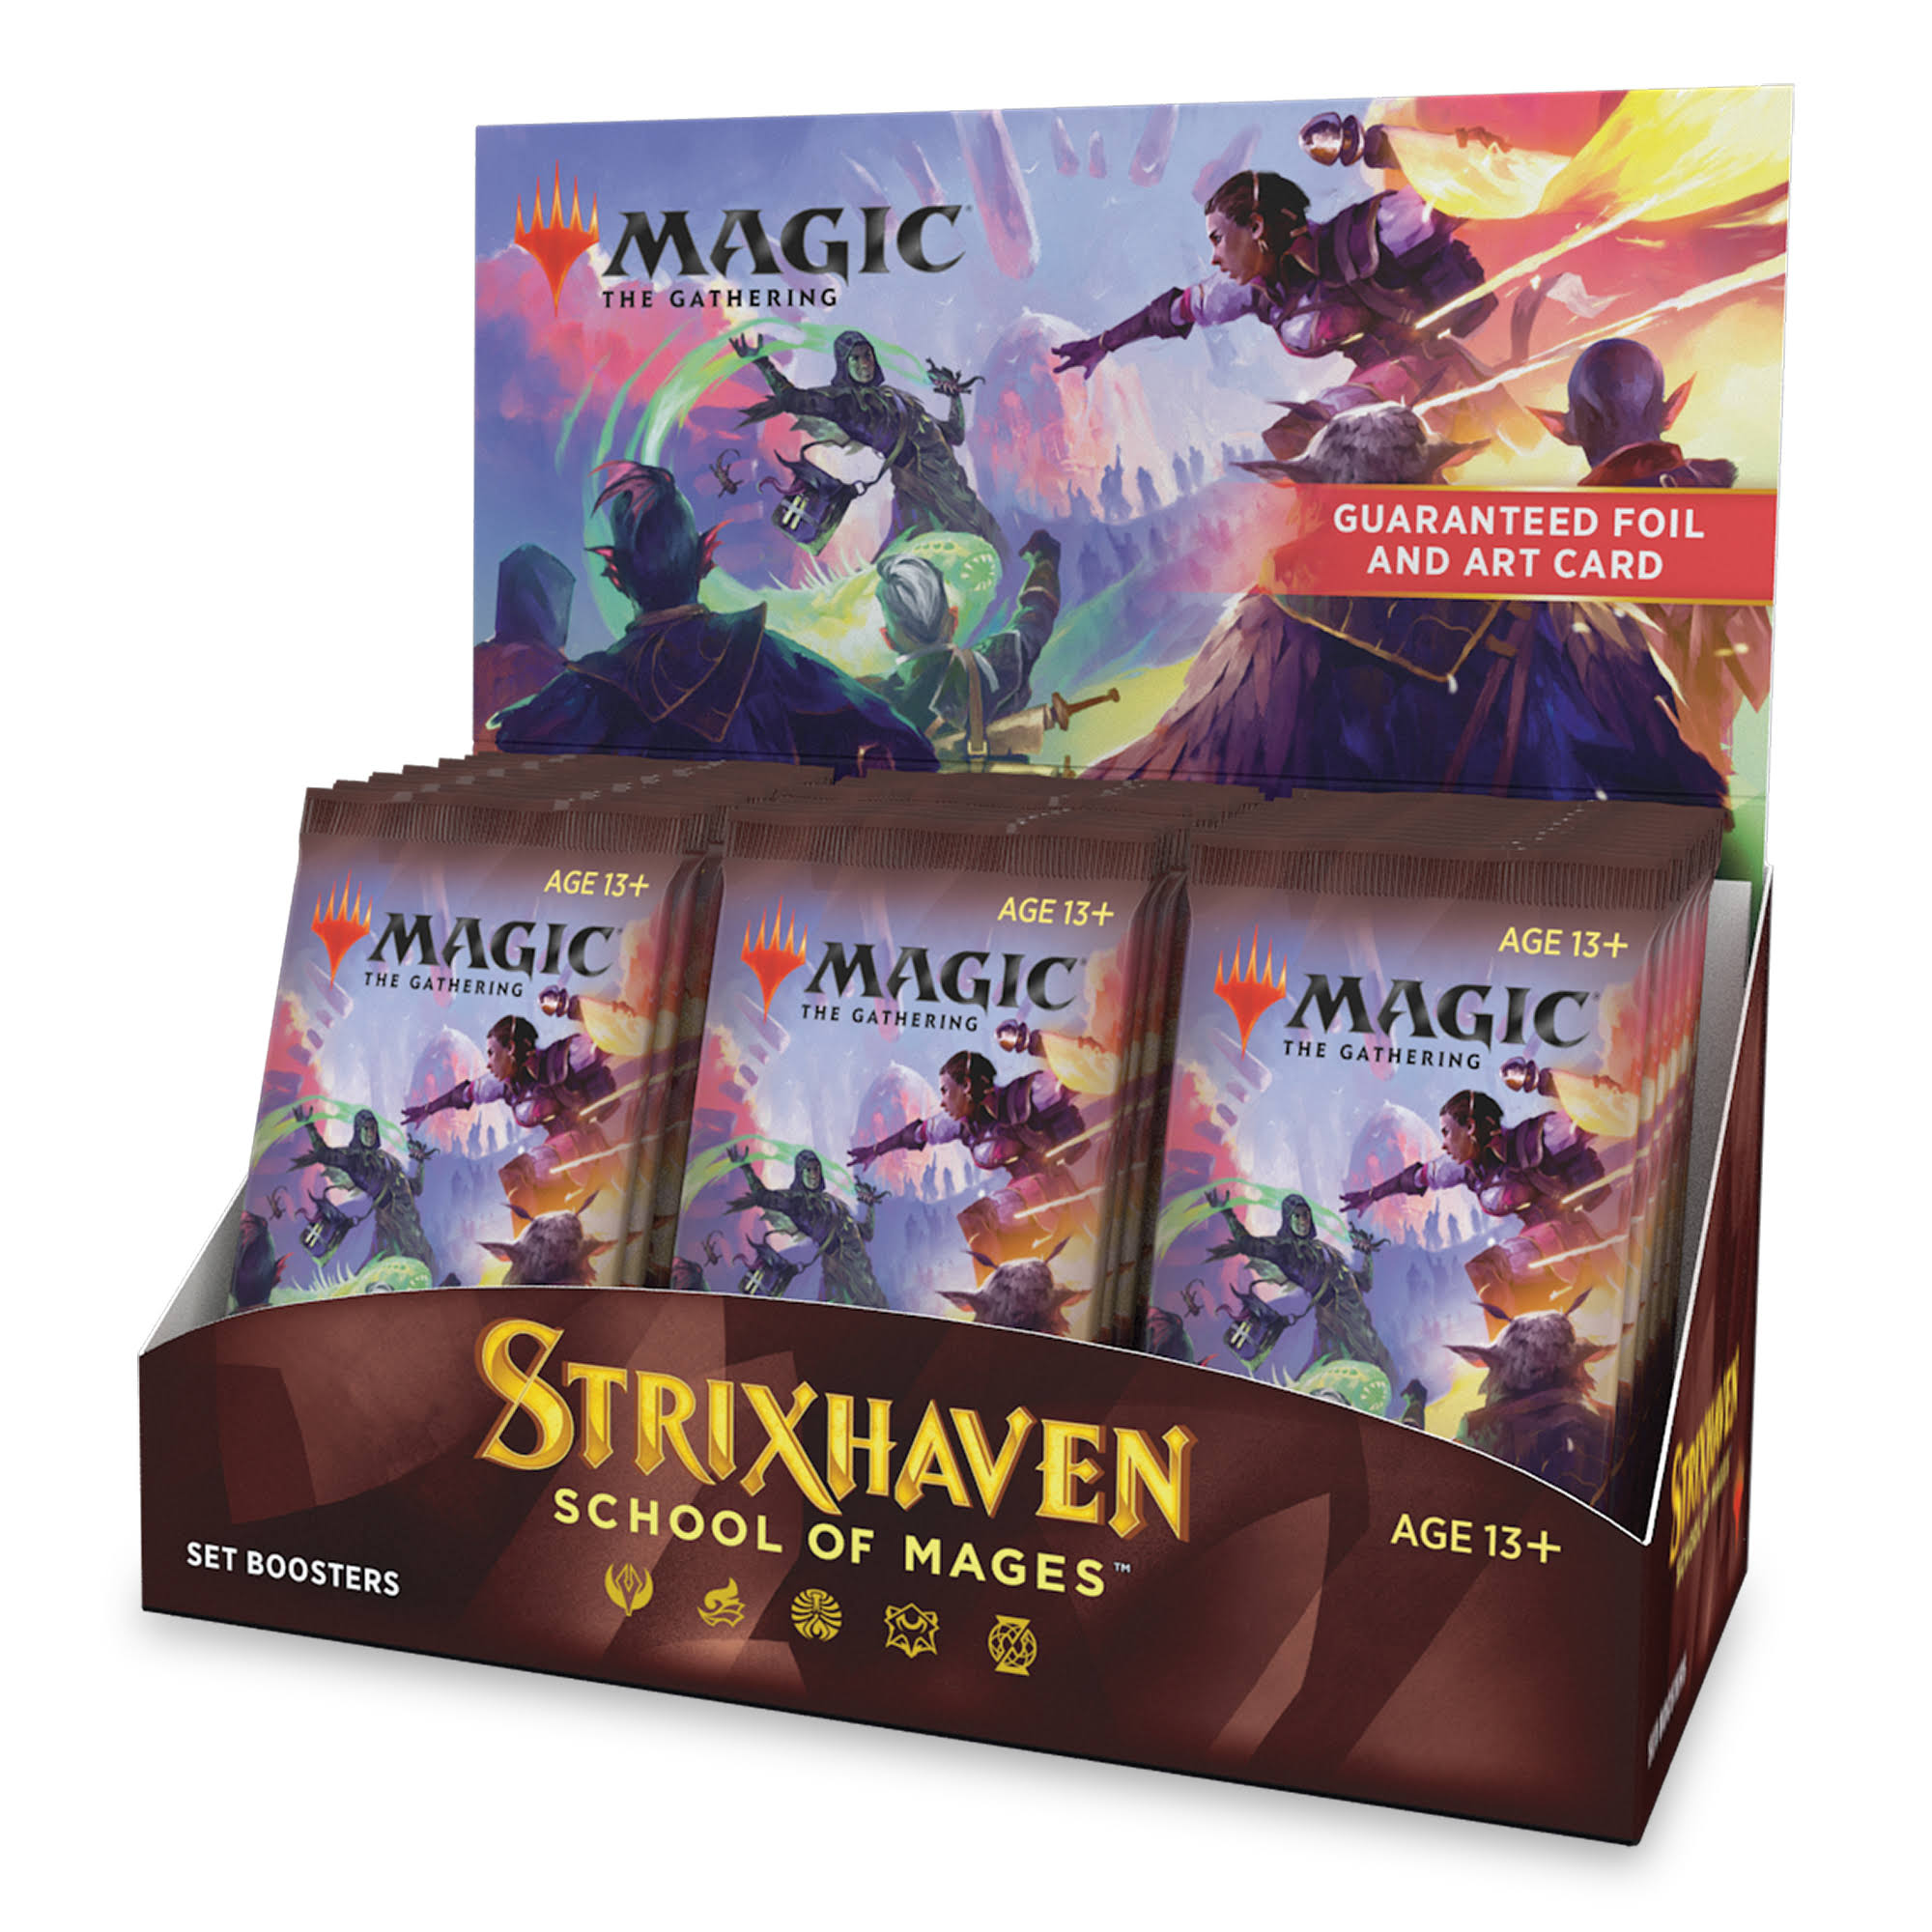 Magic The Gathering Strixhaven: School of Mages Set Booster Box